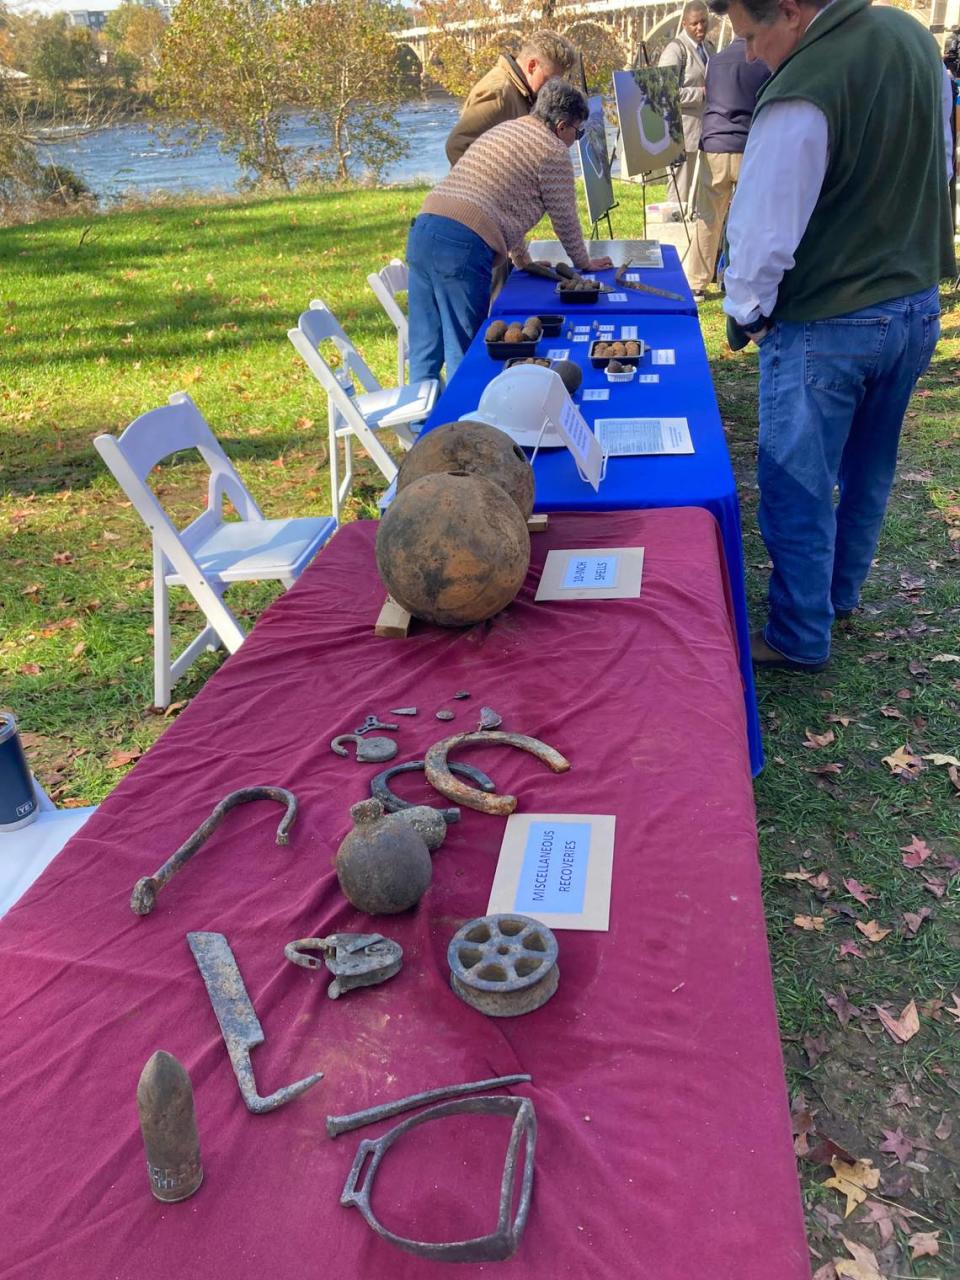 Confederate relics were discovered in the Congaree River during a cleanup of toxic coal tar. These relics were displayed Nov. 13, 2023 during a public event on the Congaree.